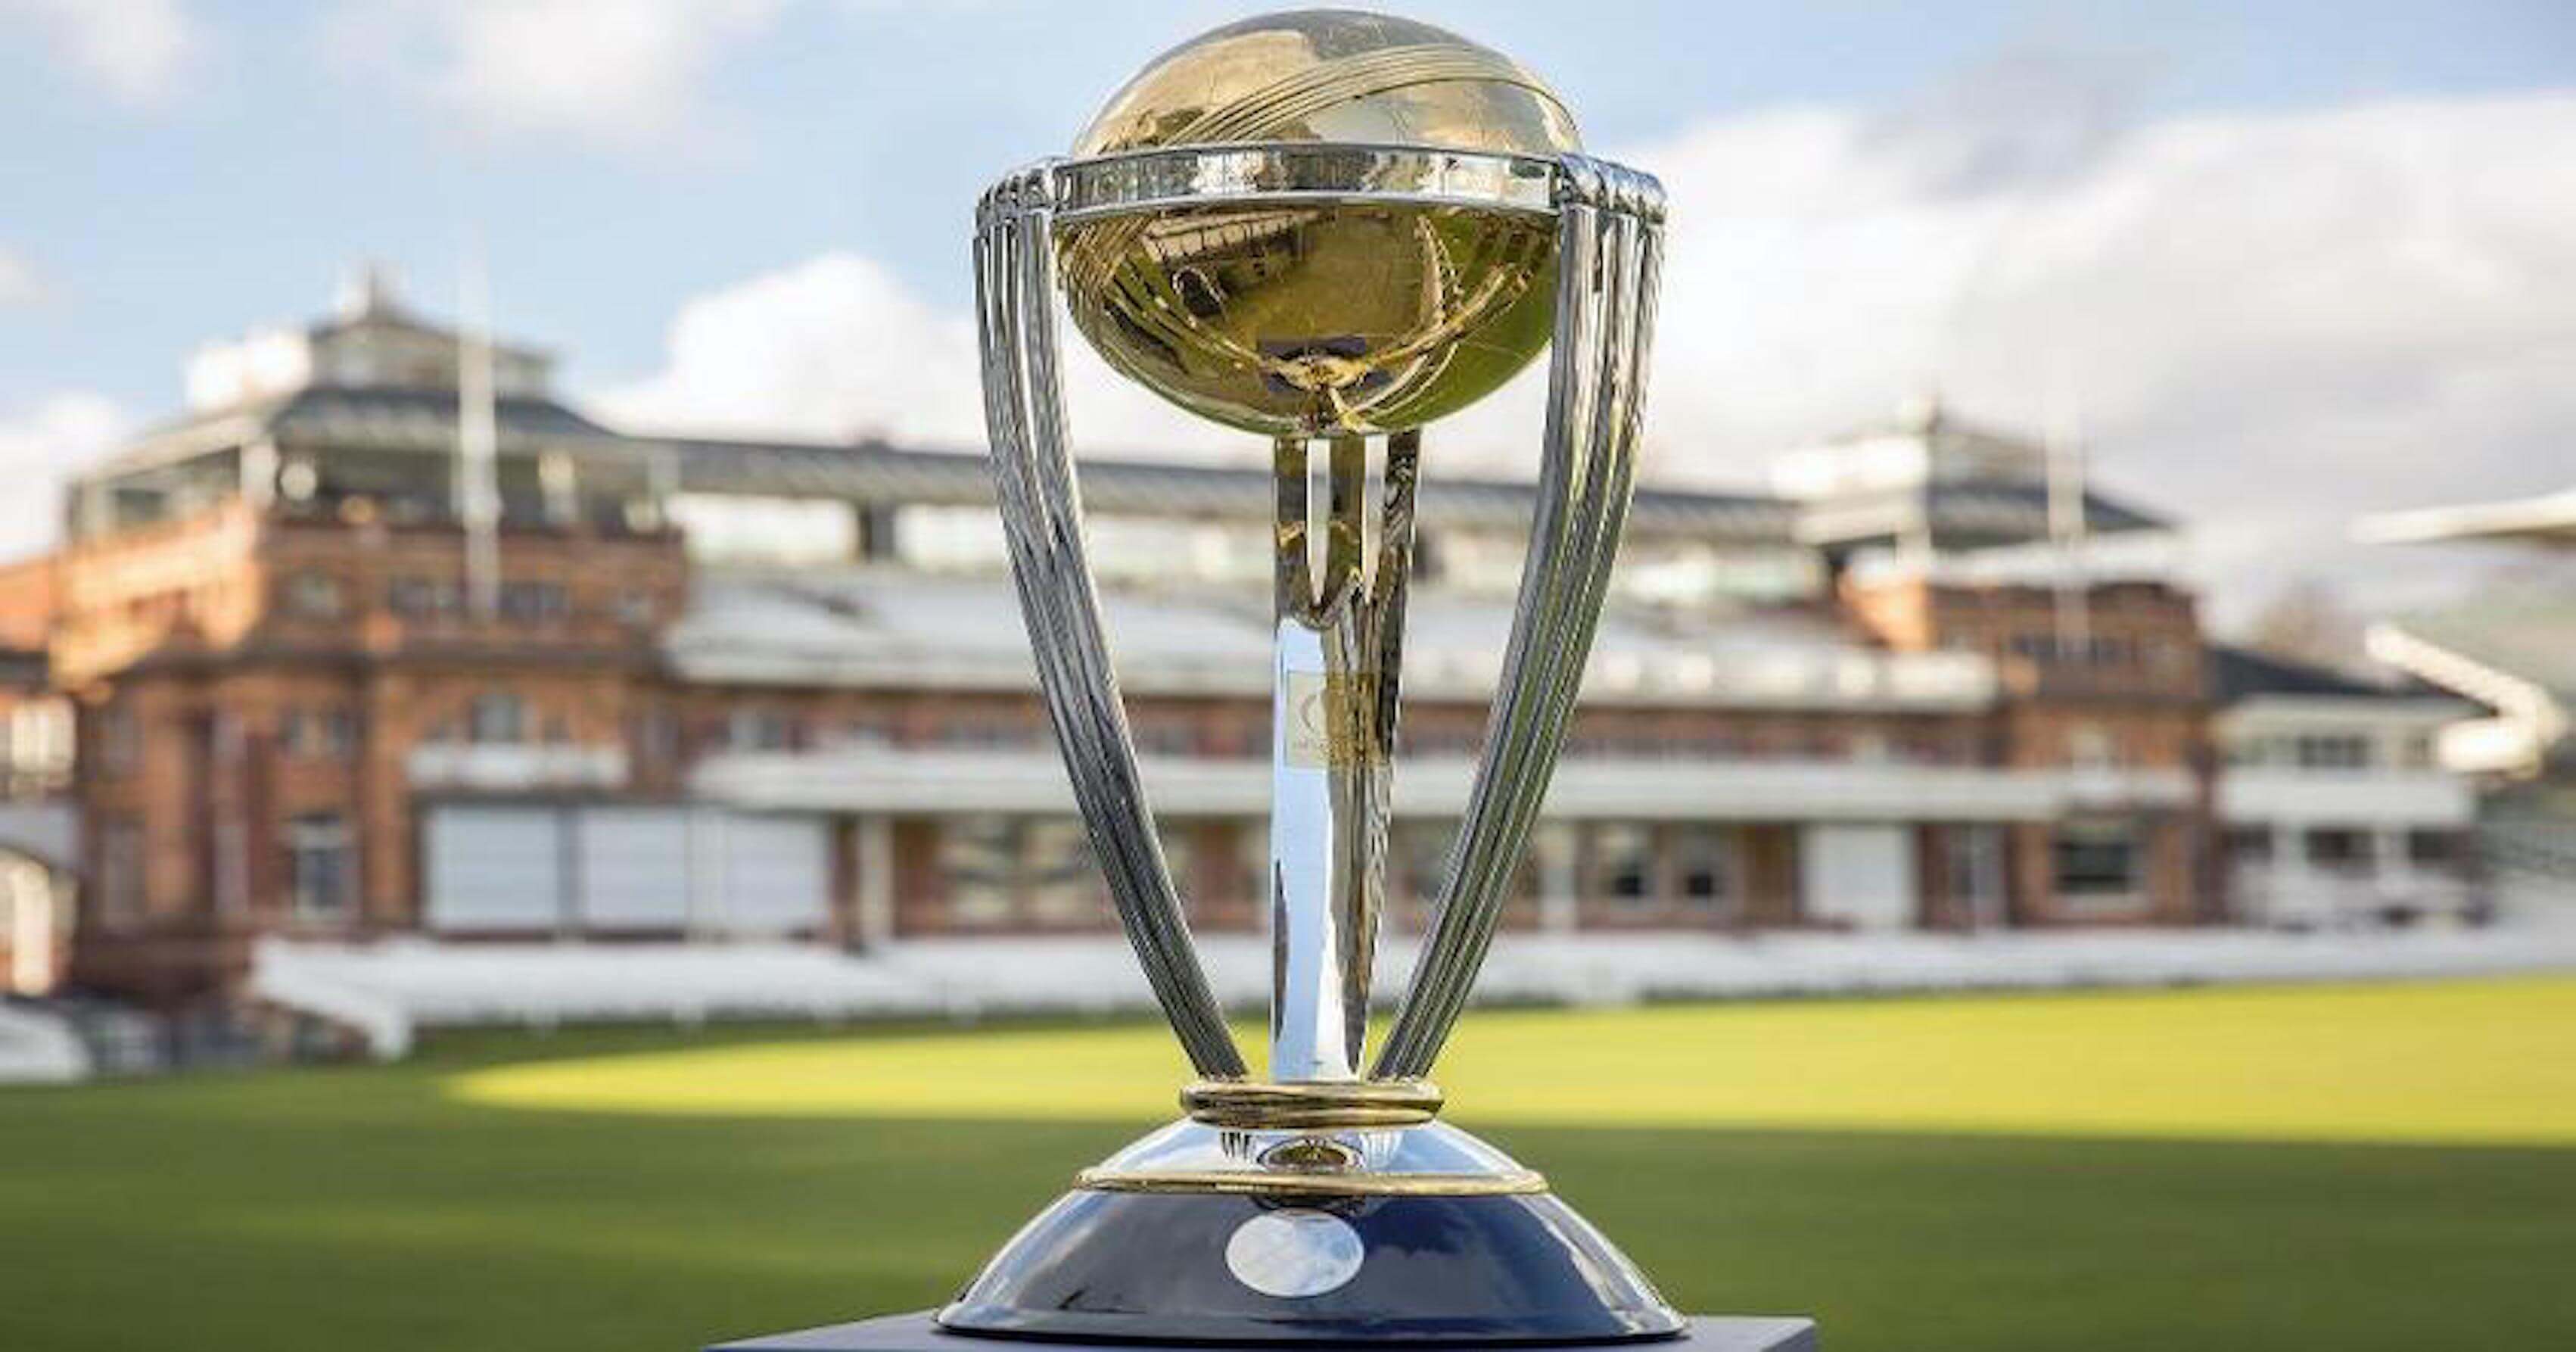 india vs pakistan match at the 2019 cricket world cup